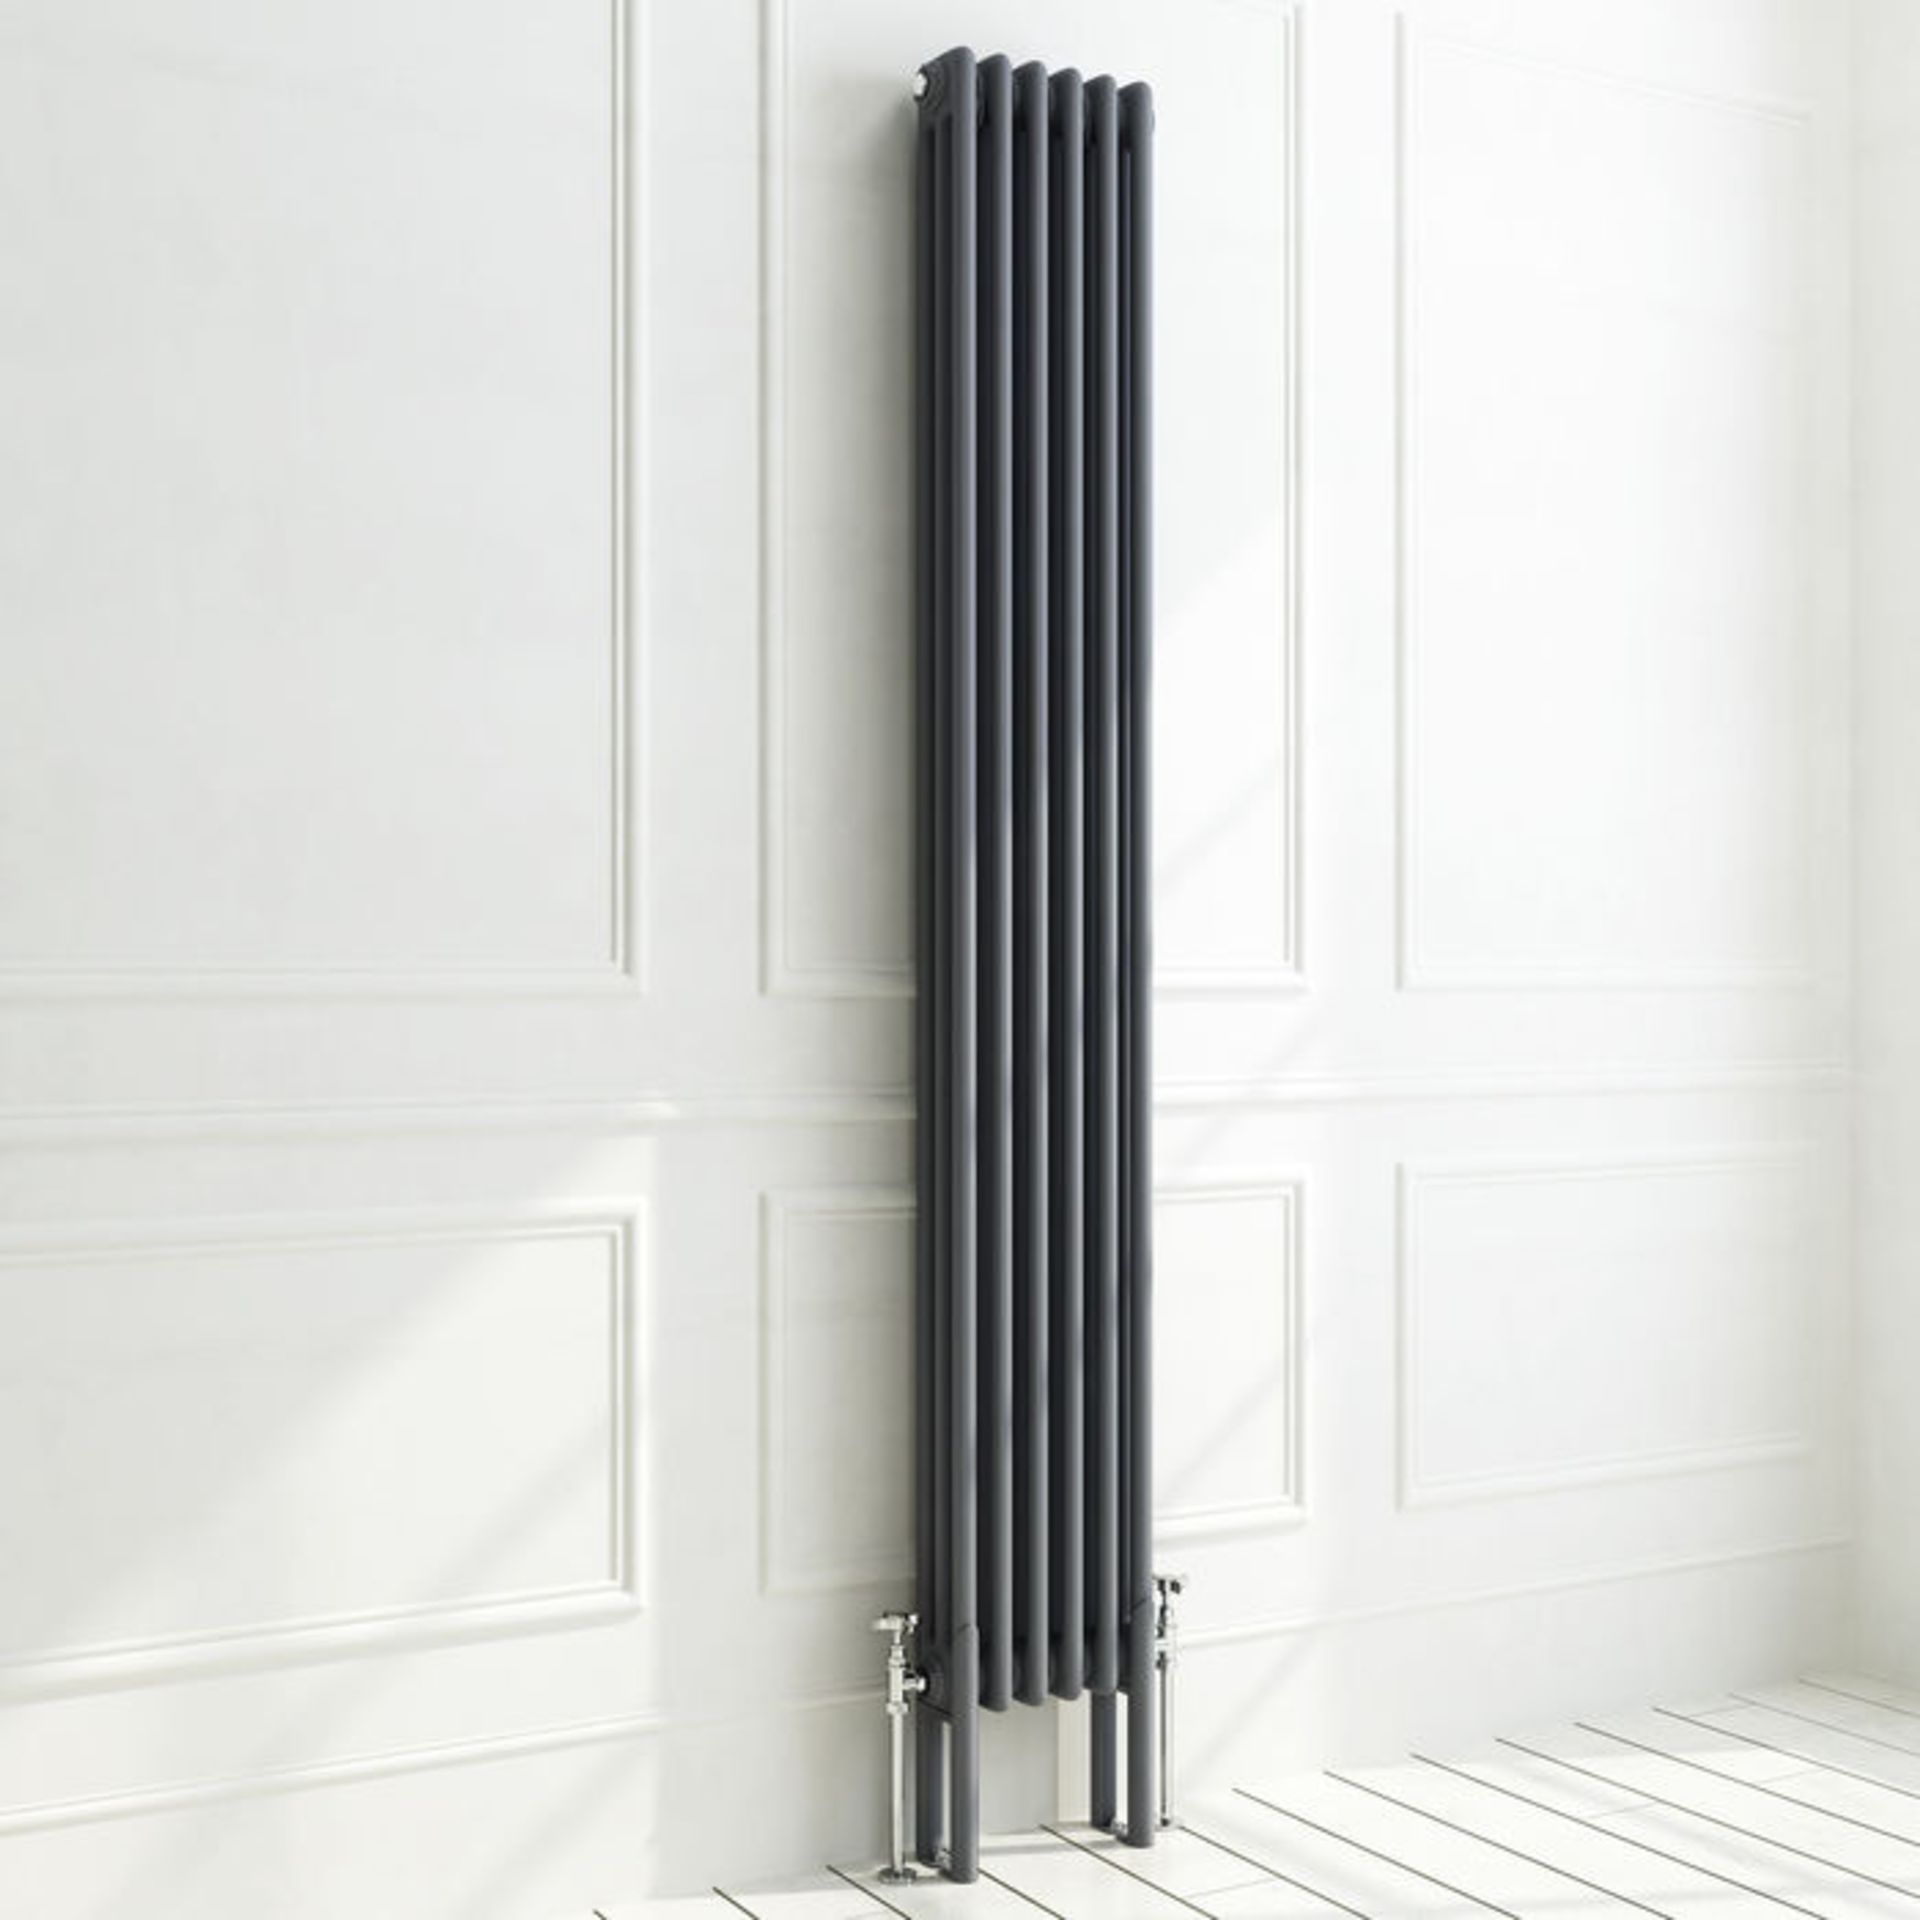 (S143) 300x102 - Wall Mounting Feet For 3 Bar Radiators - Anthracite Can be used to floor mount - Image 3 of 3